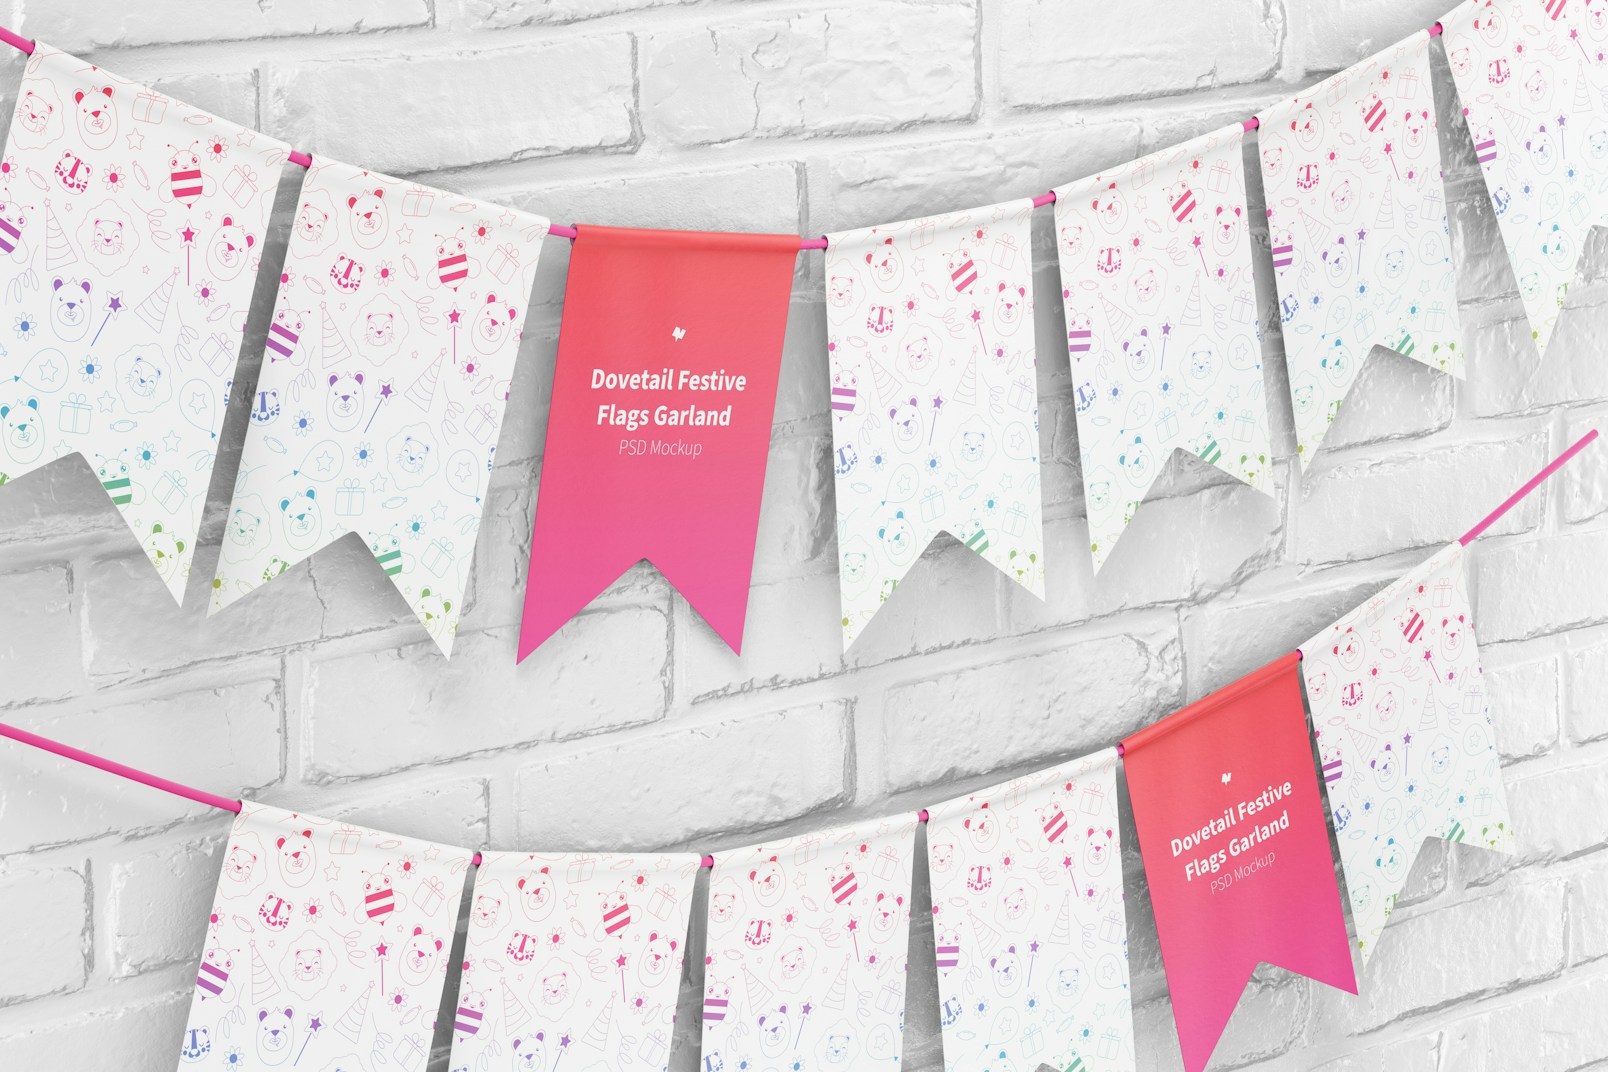 Dovetail Festive Flags Garland on Wall Mockup